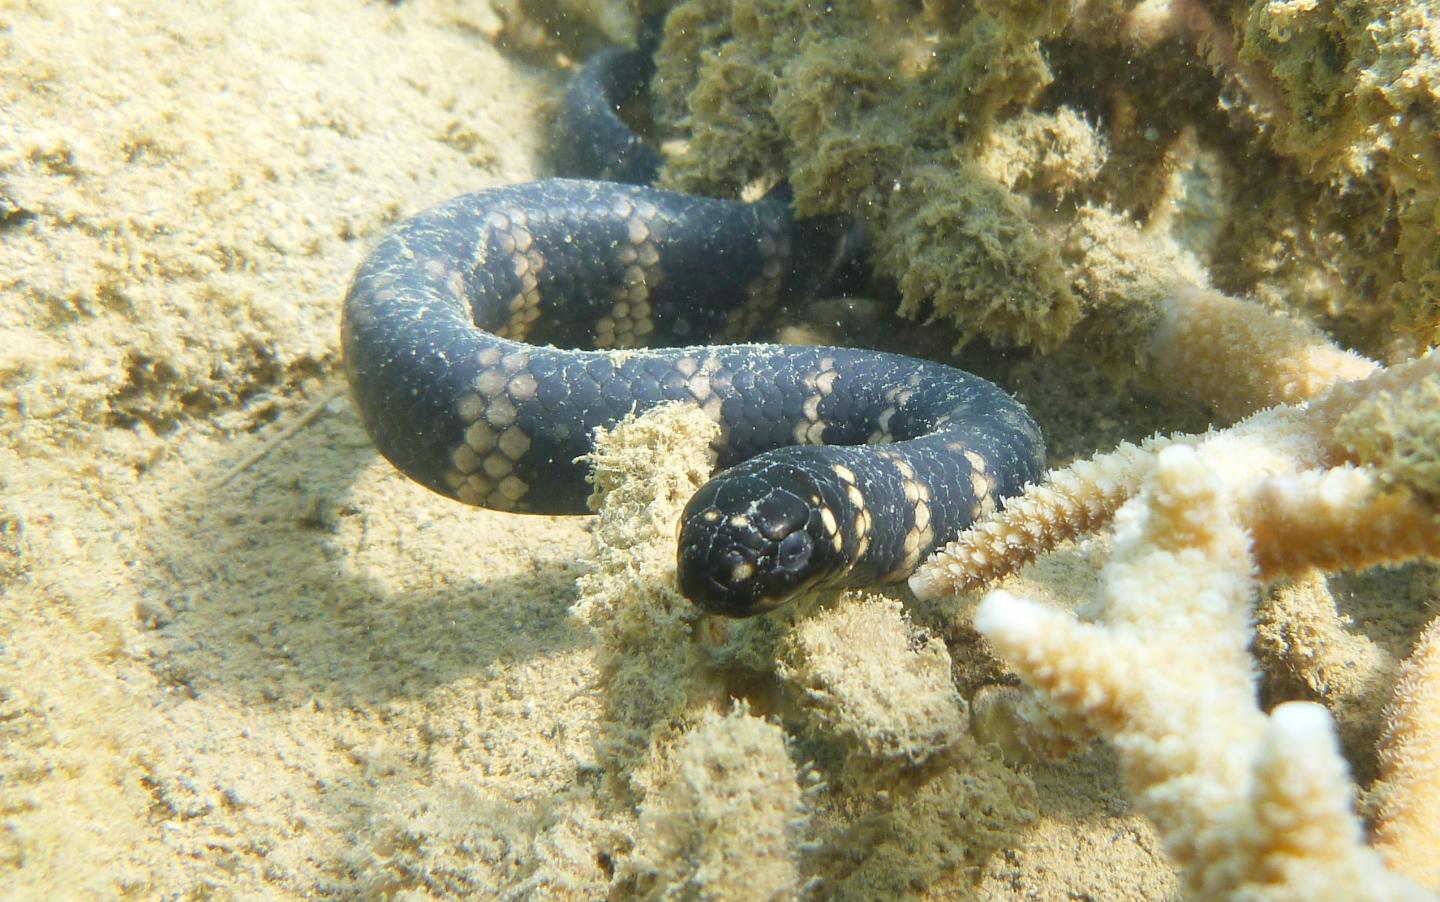 Sea snake with bands